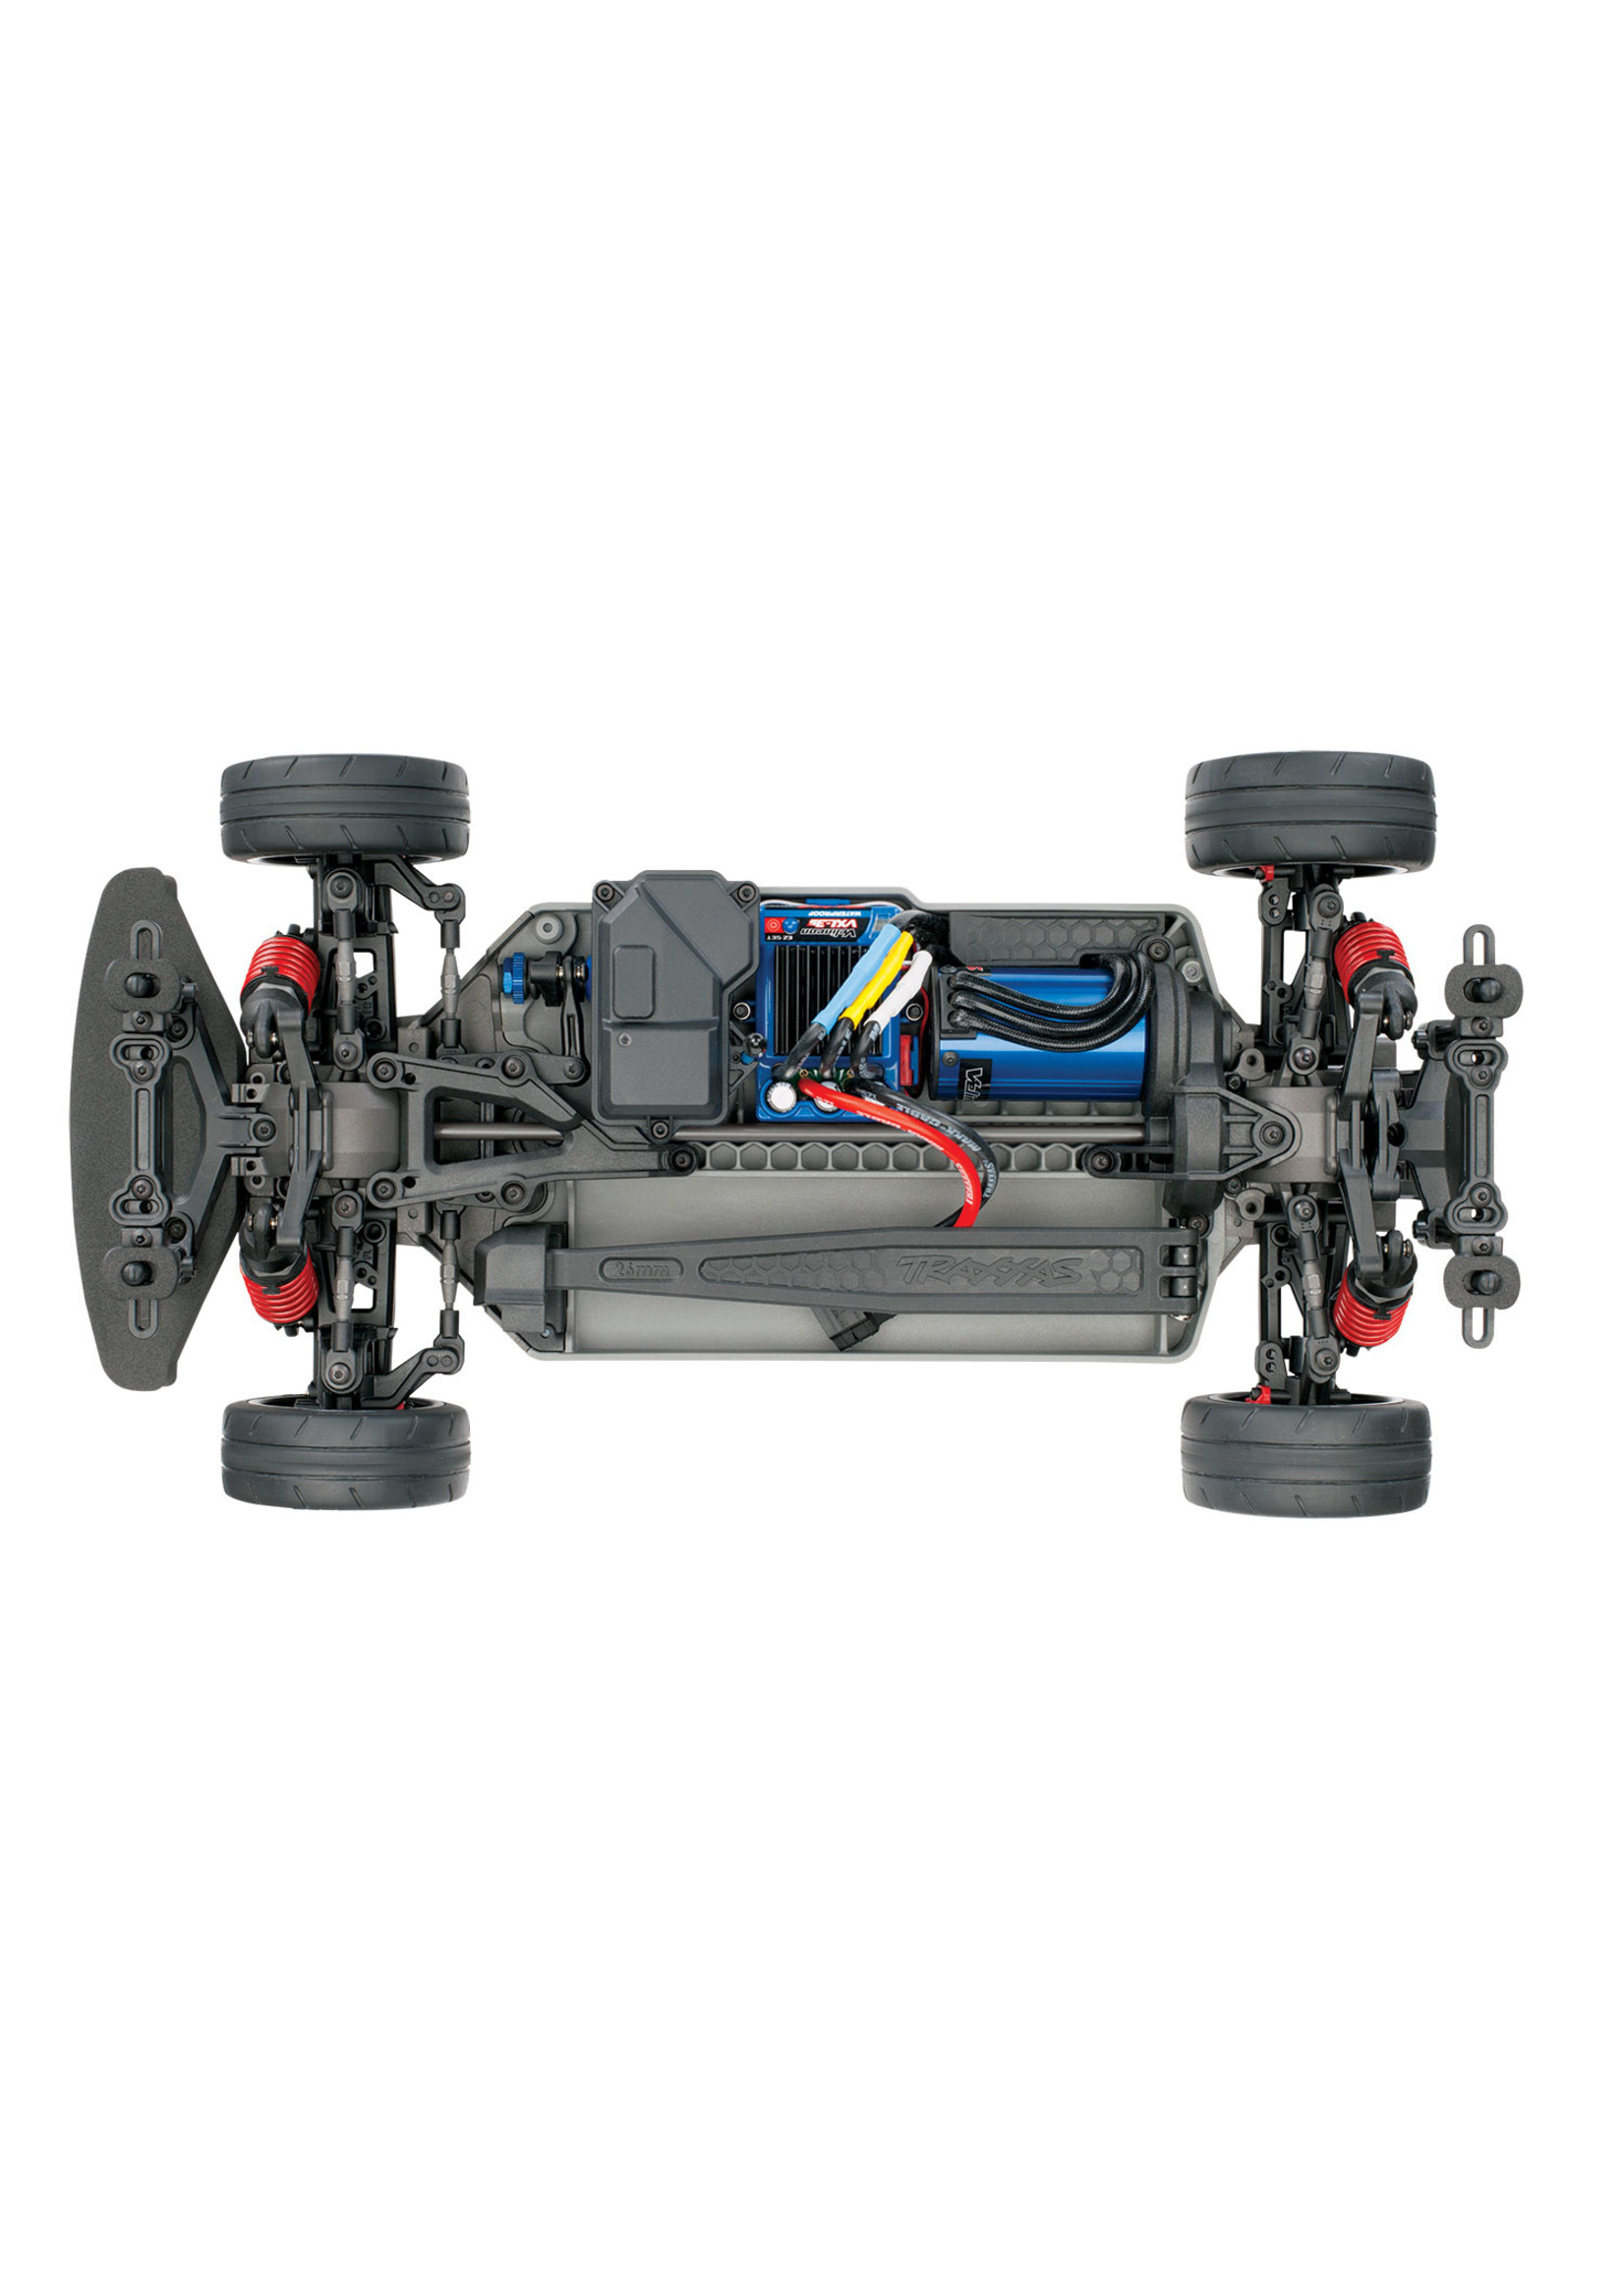 Traxxas TRA83076-4-R6 Traxxas 4-Tec 2.0 VXL: 1/10 Scale AWD Chassis with TQi Traxxas Link Enabled 2.4Ghz Radio System & Traxxas Stability Management (TSM)